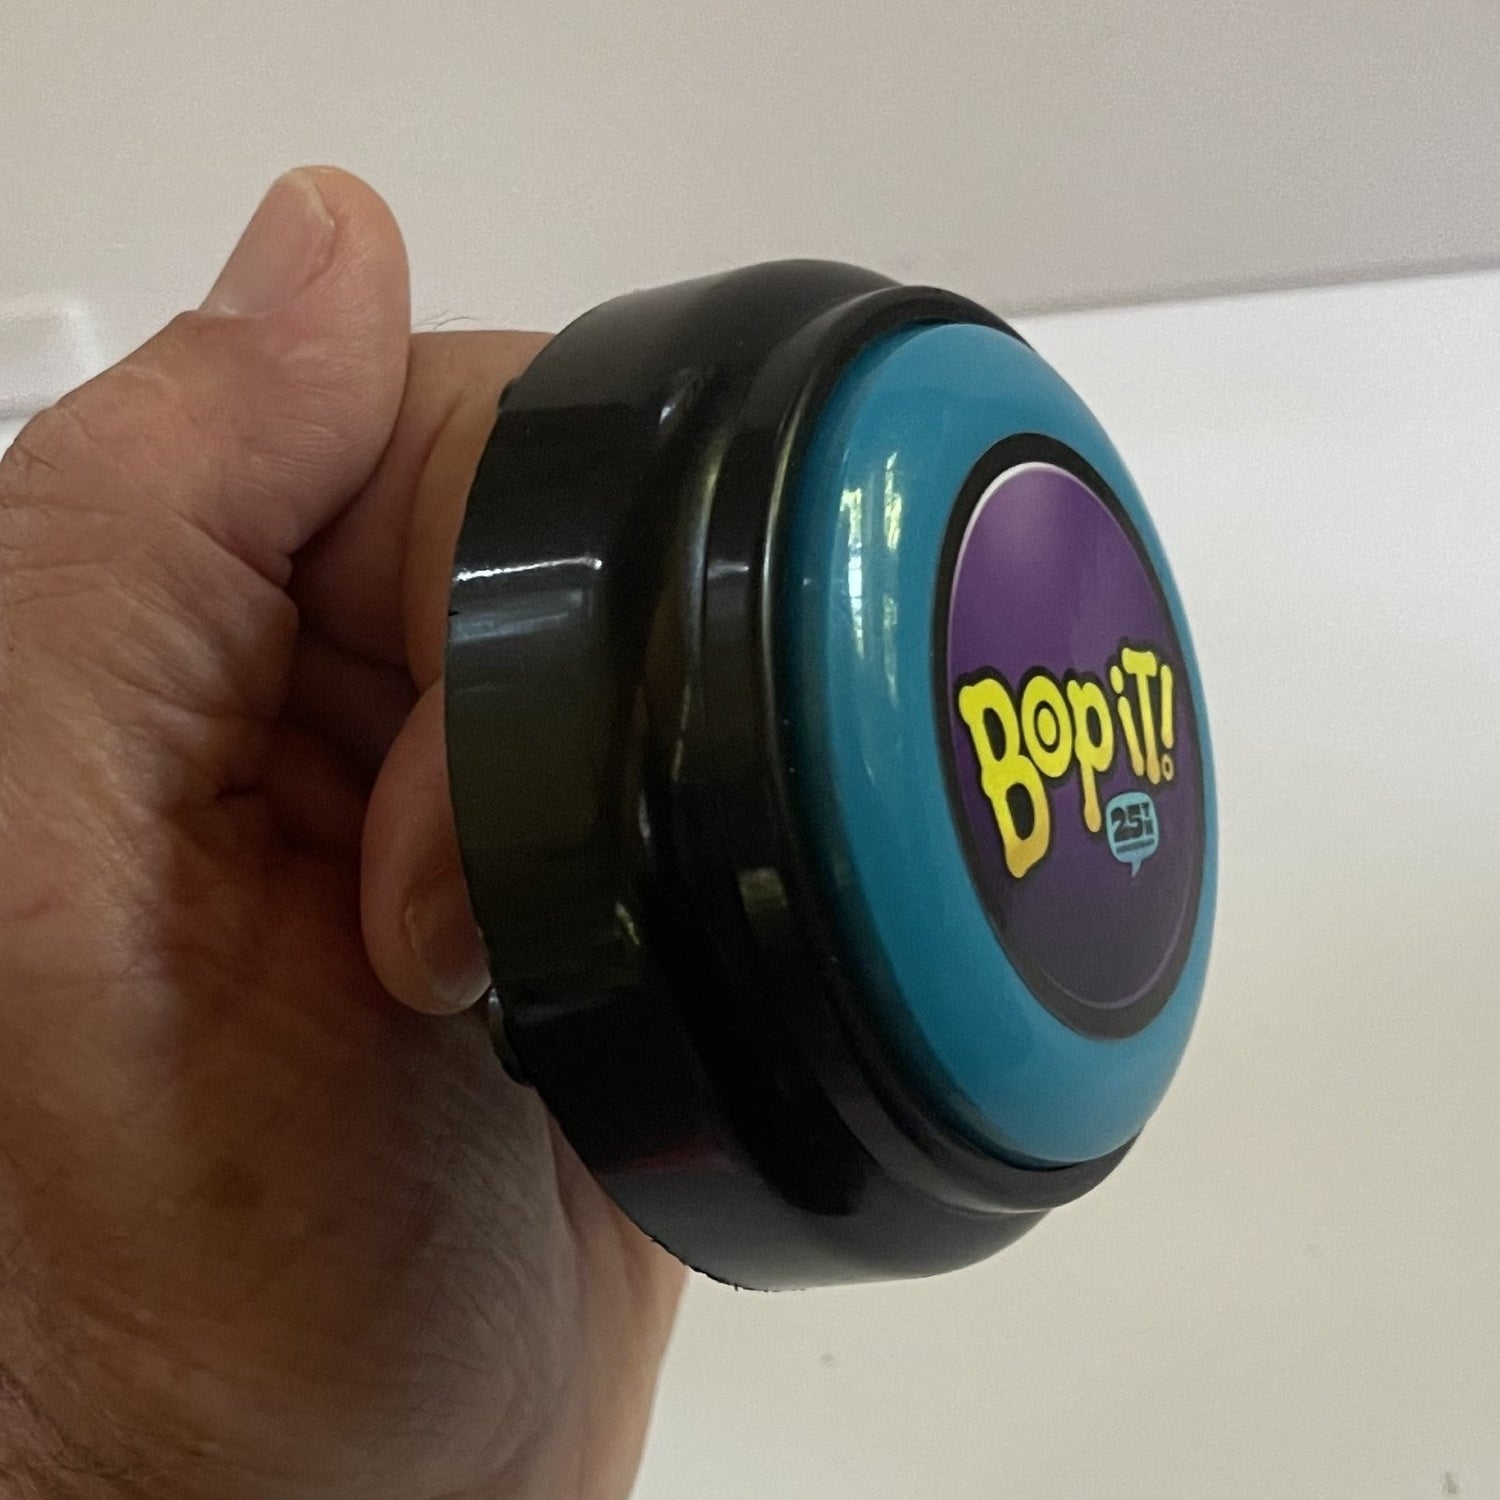 SPECIAL OFFER Bop It: The Card Game (pre-release limited edition)